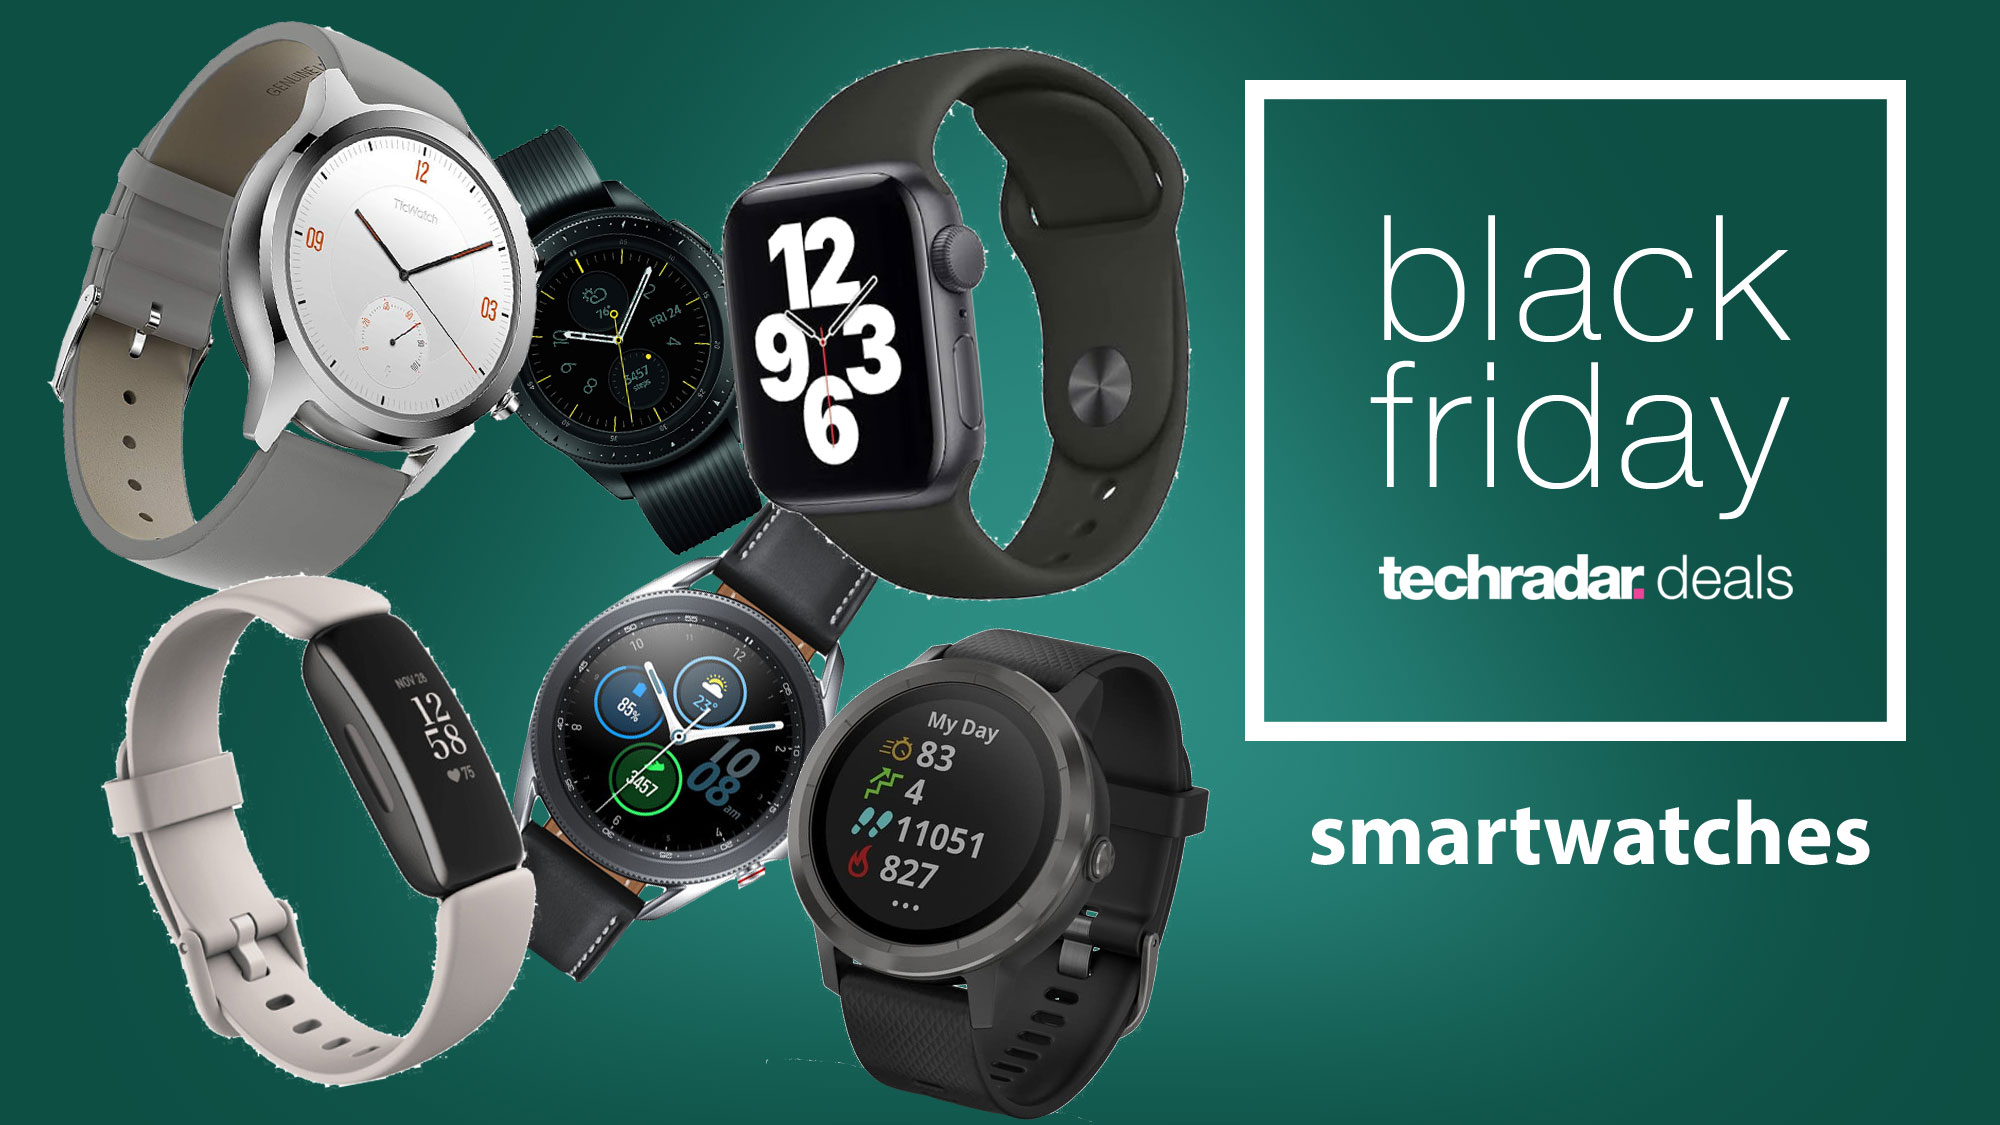 Black Friday smartwatch deals: the top 